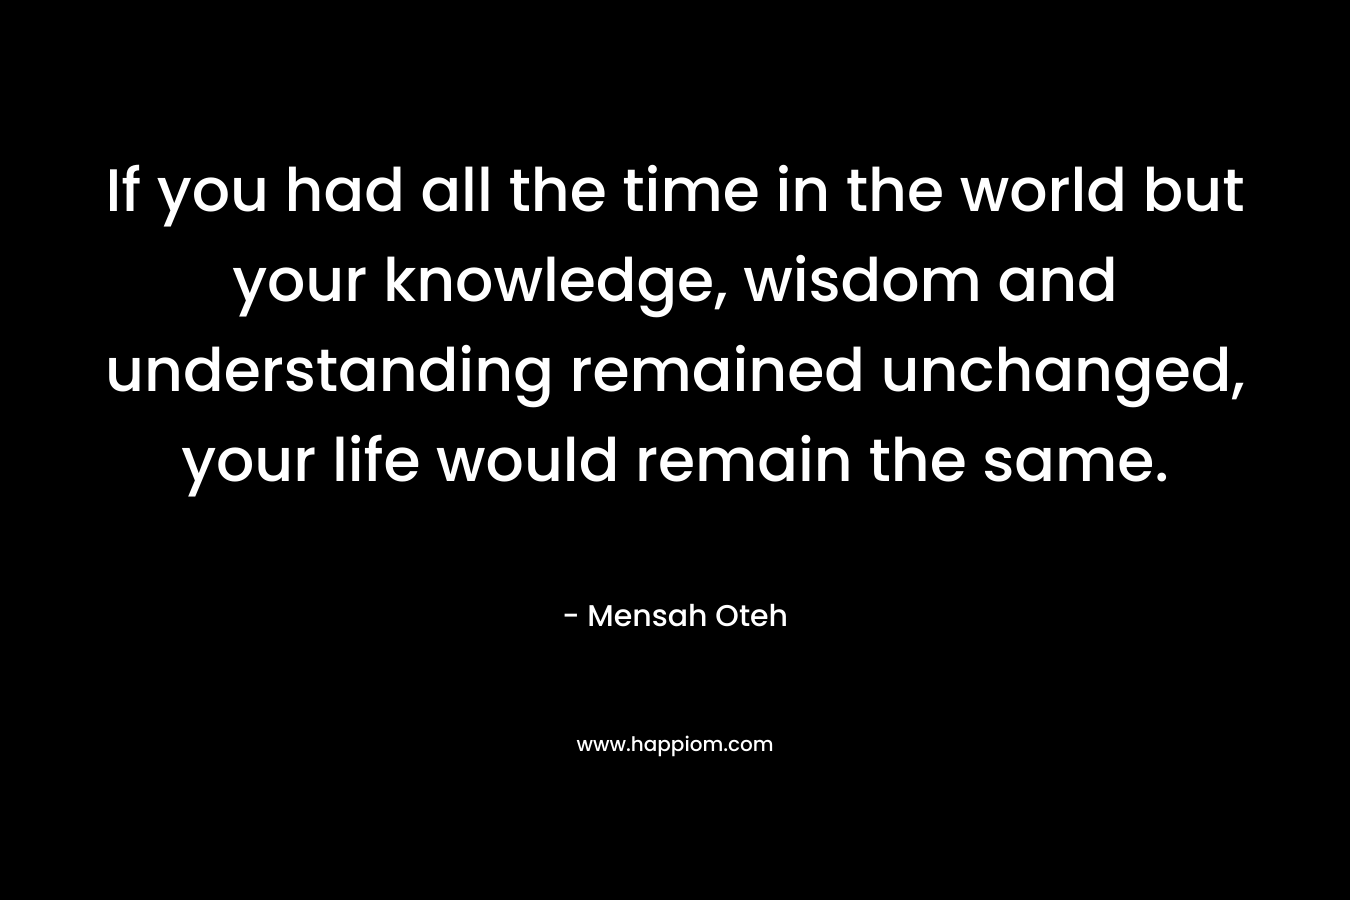 If you had all the time in the world but your knowledge, wisdom and understanding remained unchanged, your life would remain the same.